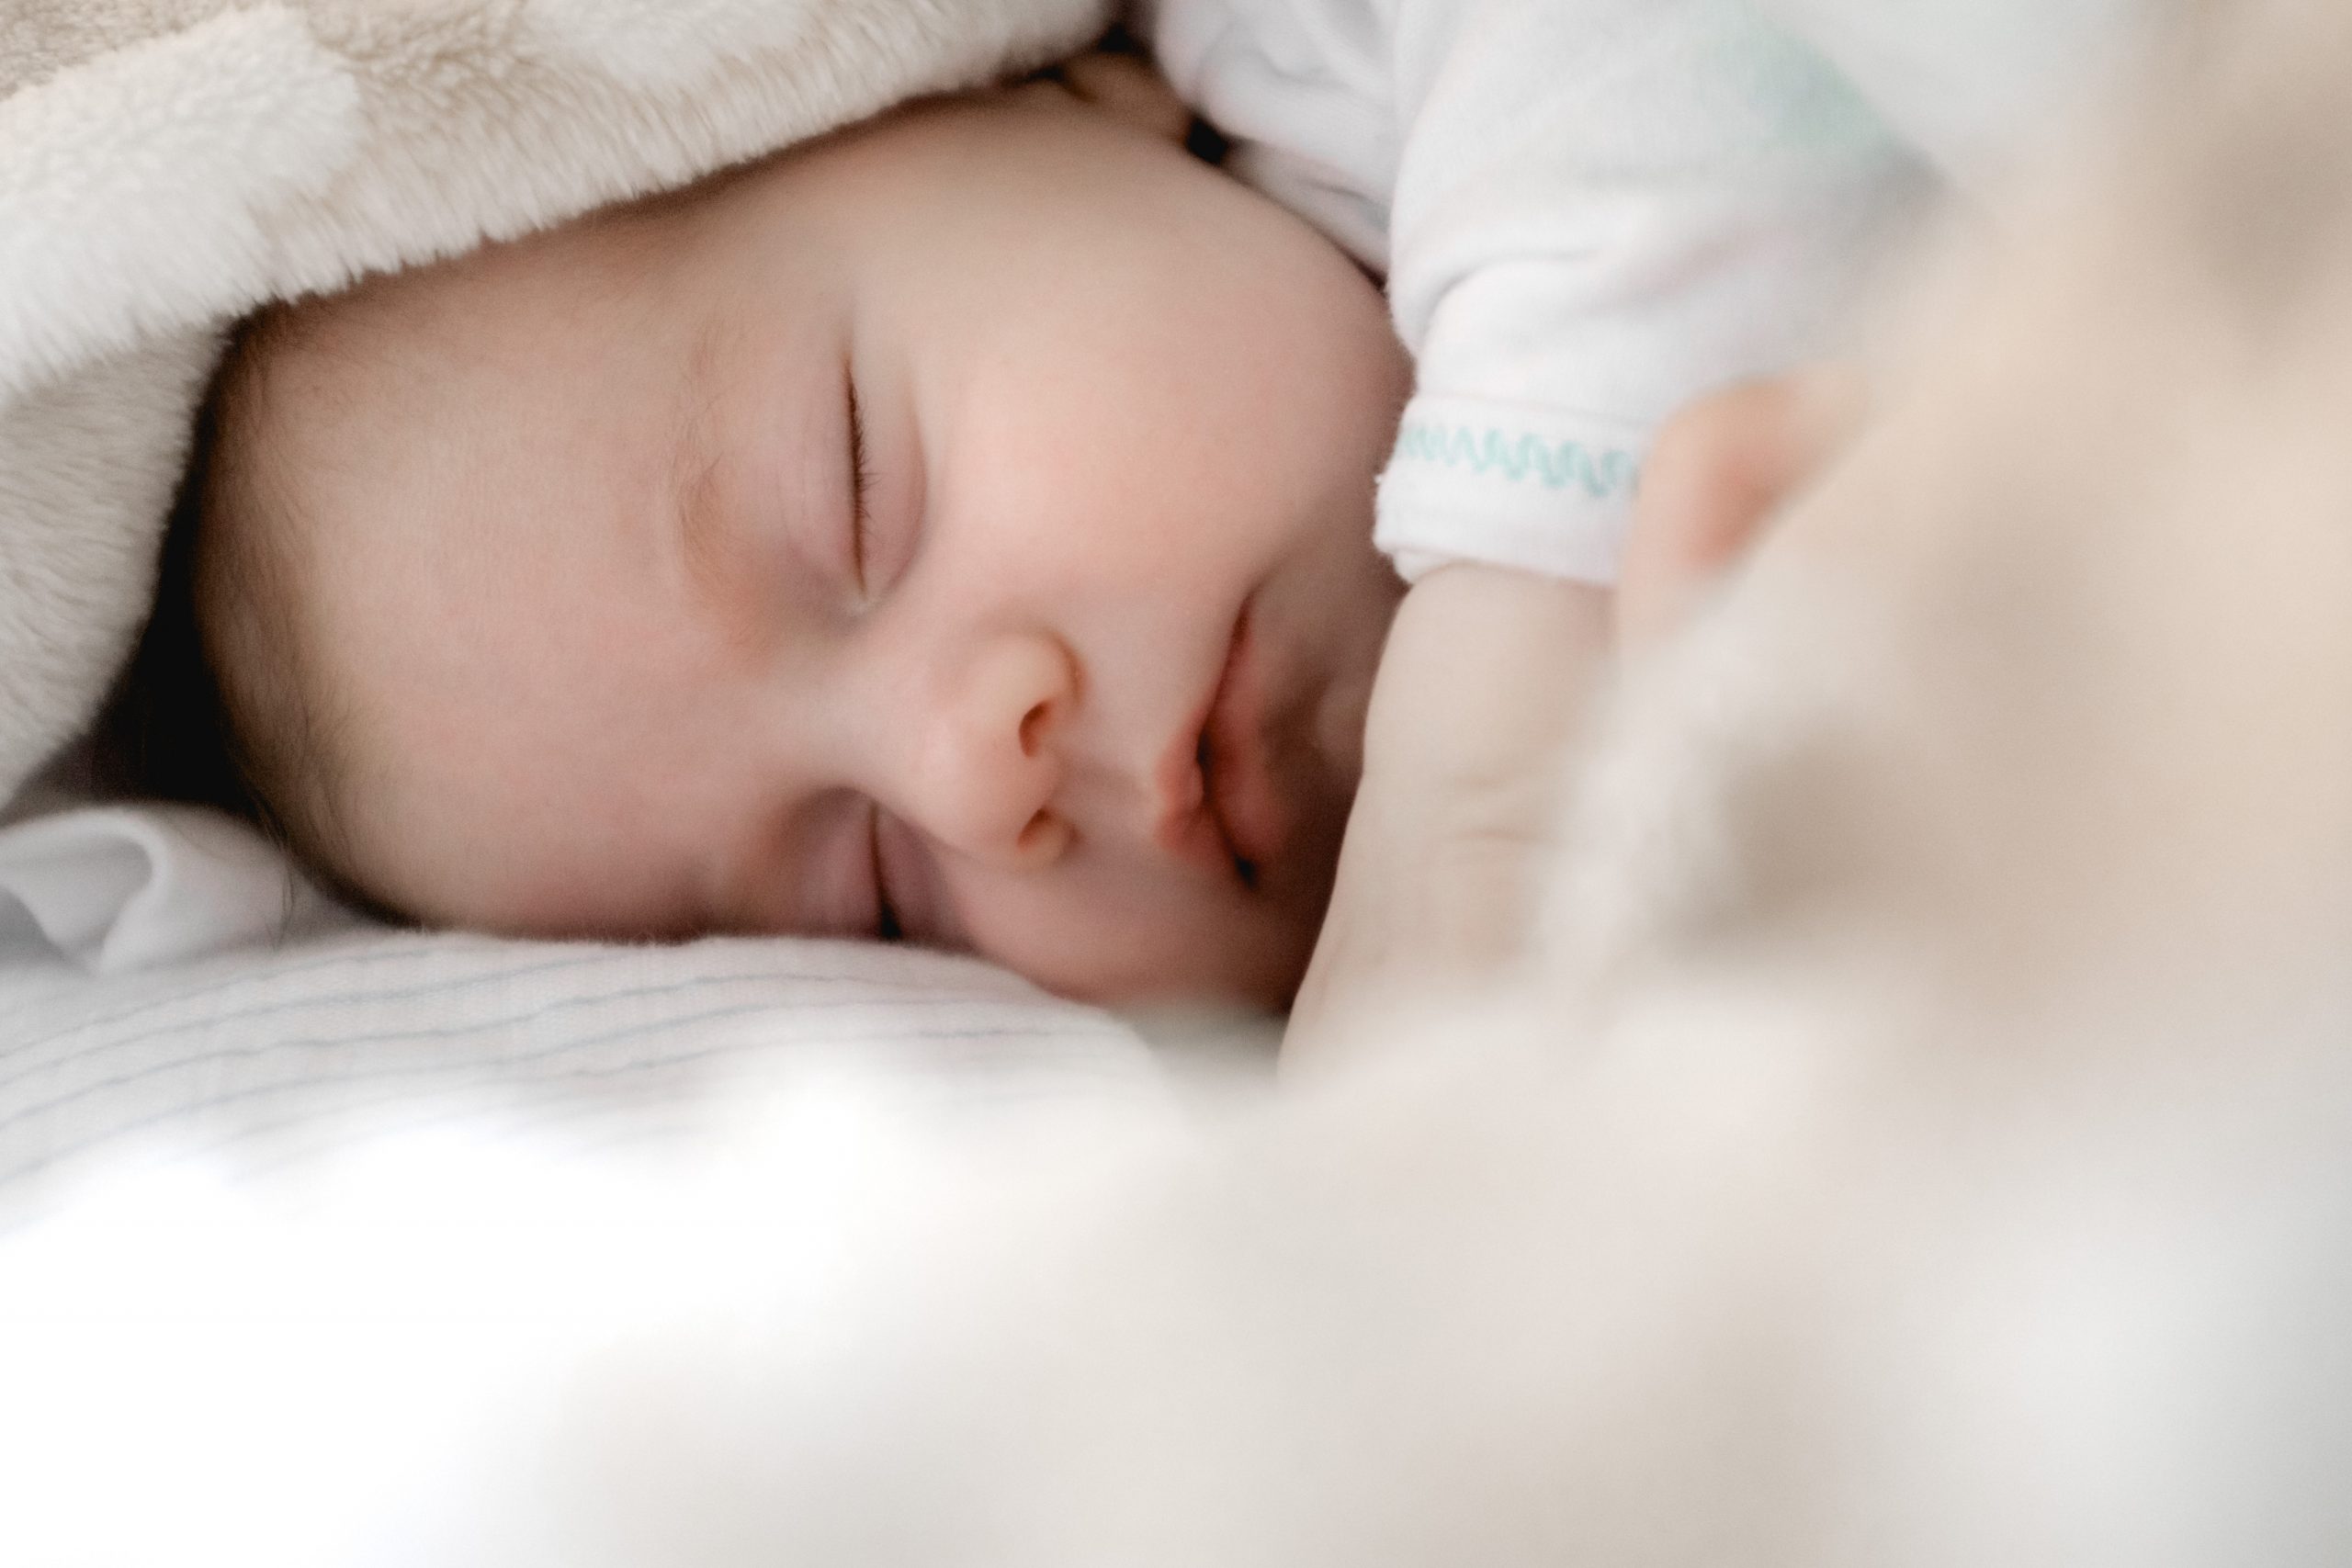 What You Need to Know About Co-Sleeping or Bed-Sharing